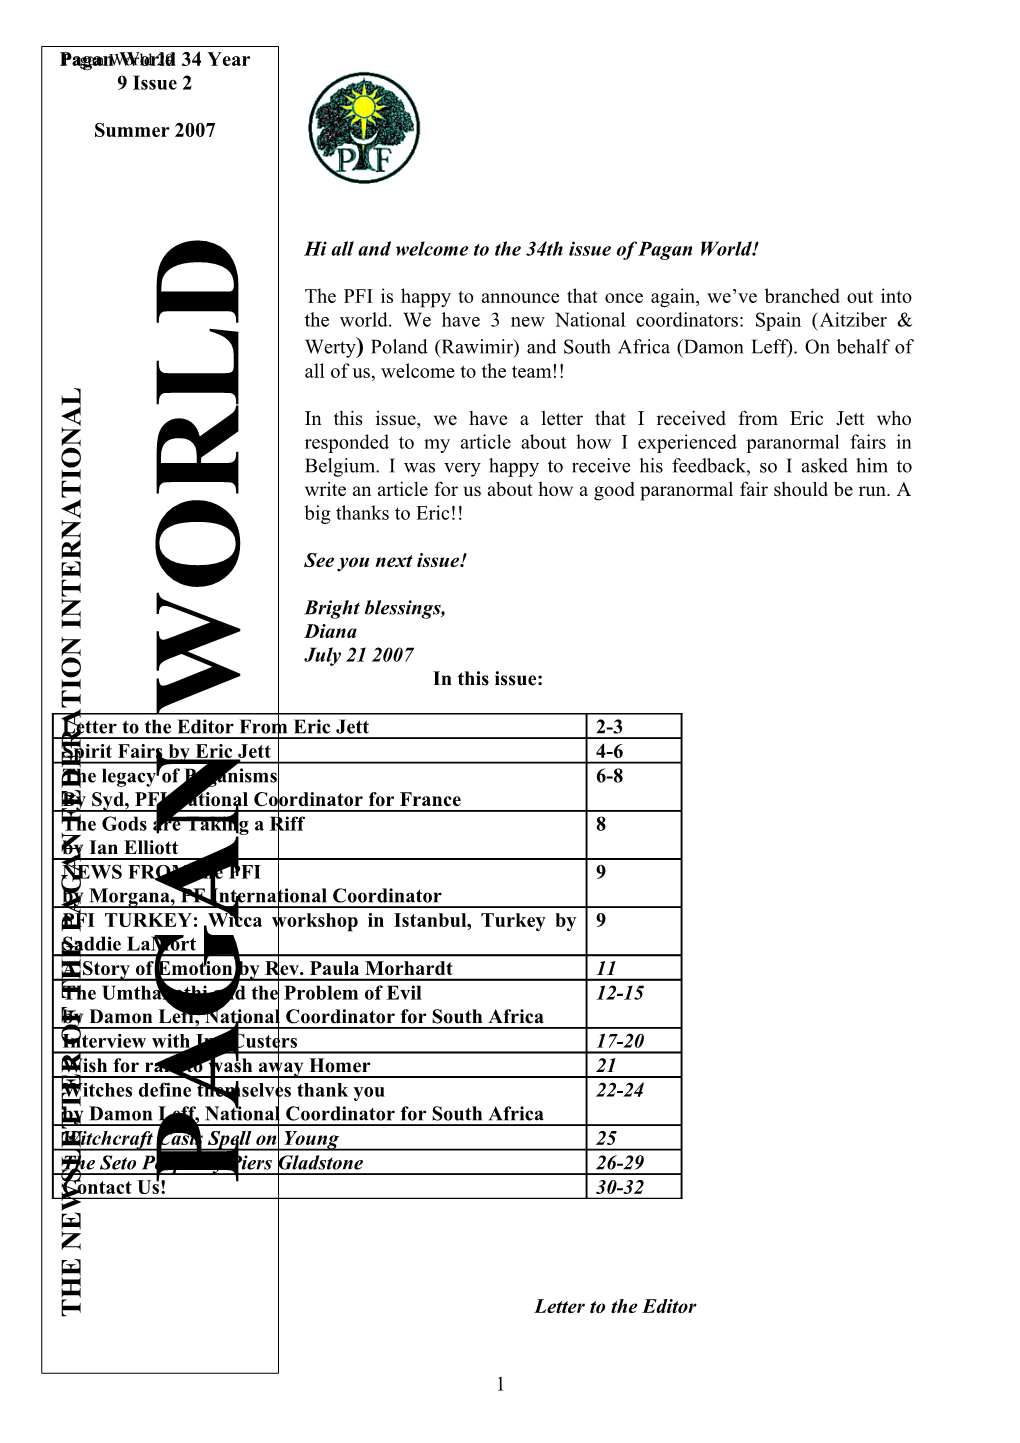 Hi All and Welcome to the 34Th Issue of Pagan World!